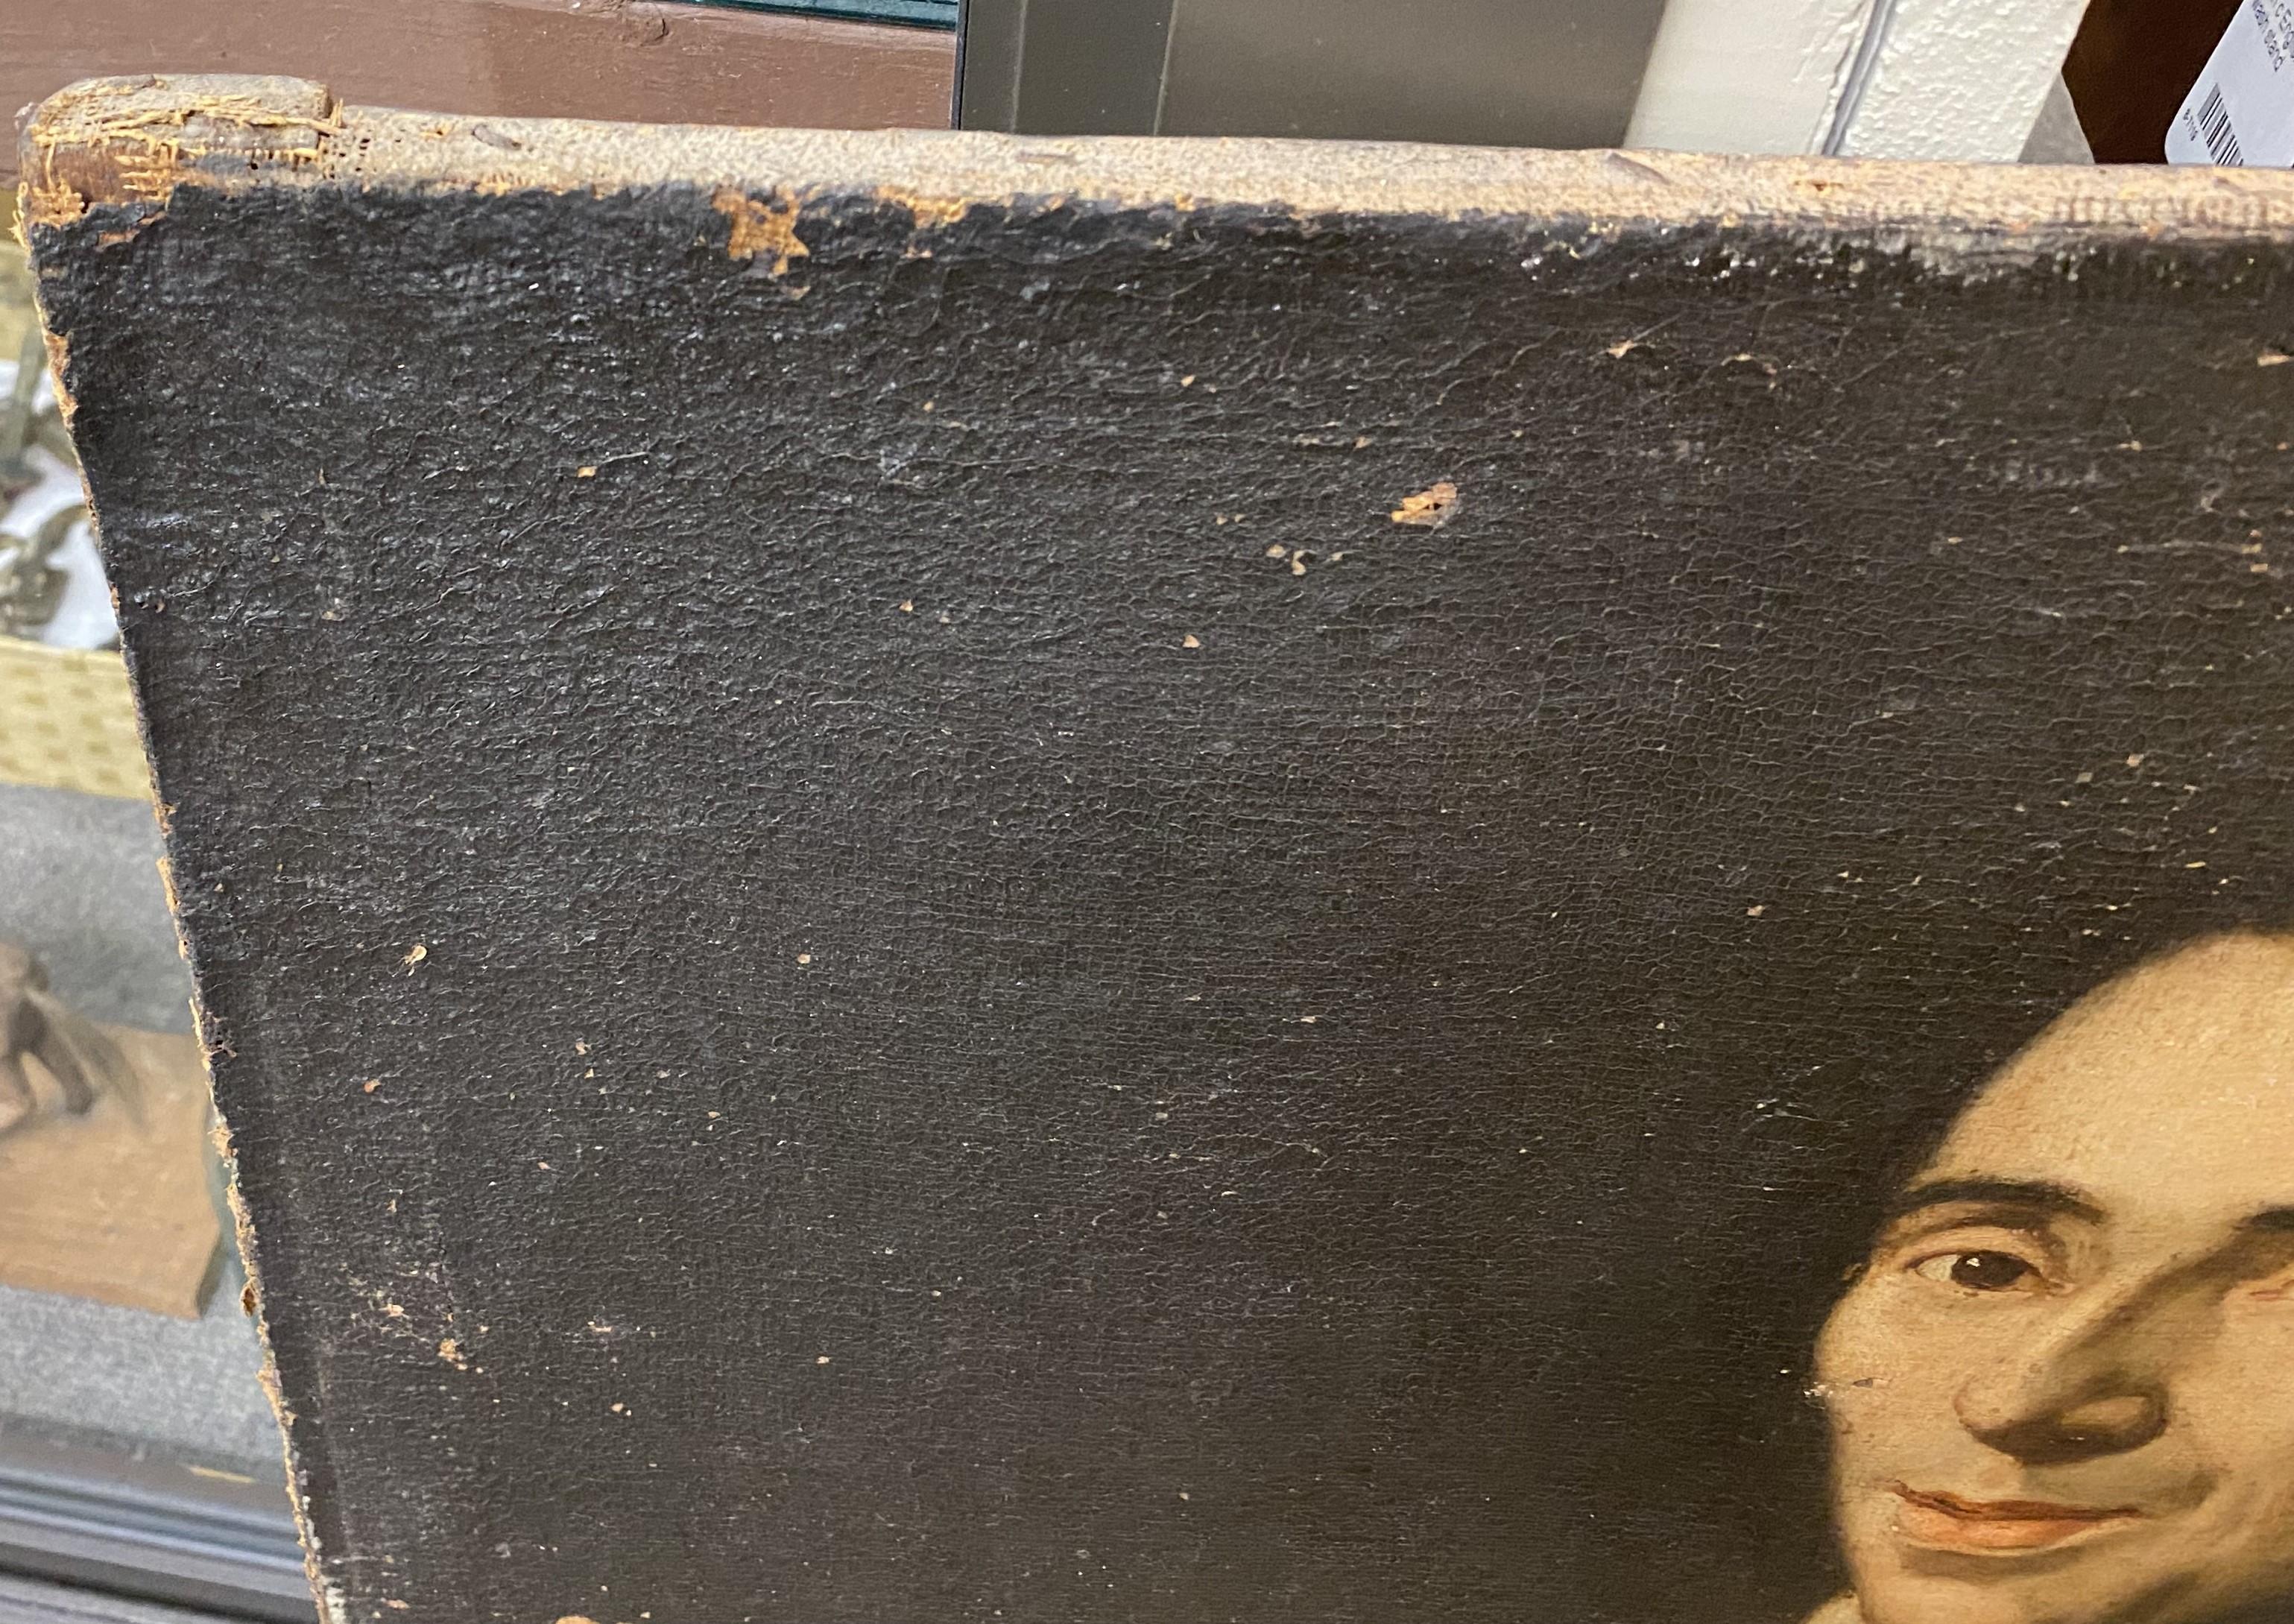 A fine European portrait of a priest, oil on canvas, probably dating to the 17th or 18th century, unsigned, with original stretcher, minor surface losses and damage, craquelure, edge losses, and wear commensurate with age and use. Dimensions: 29.5